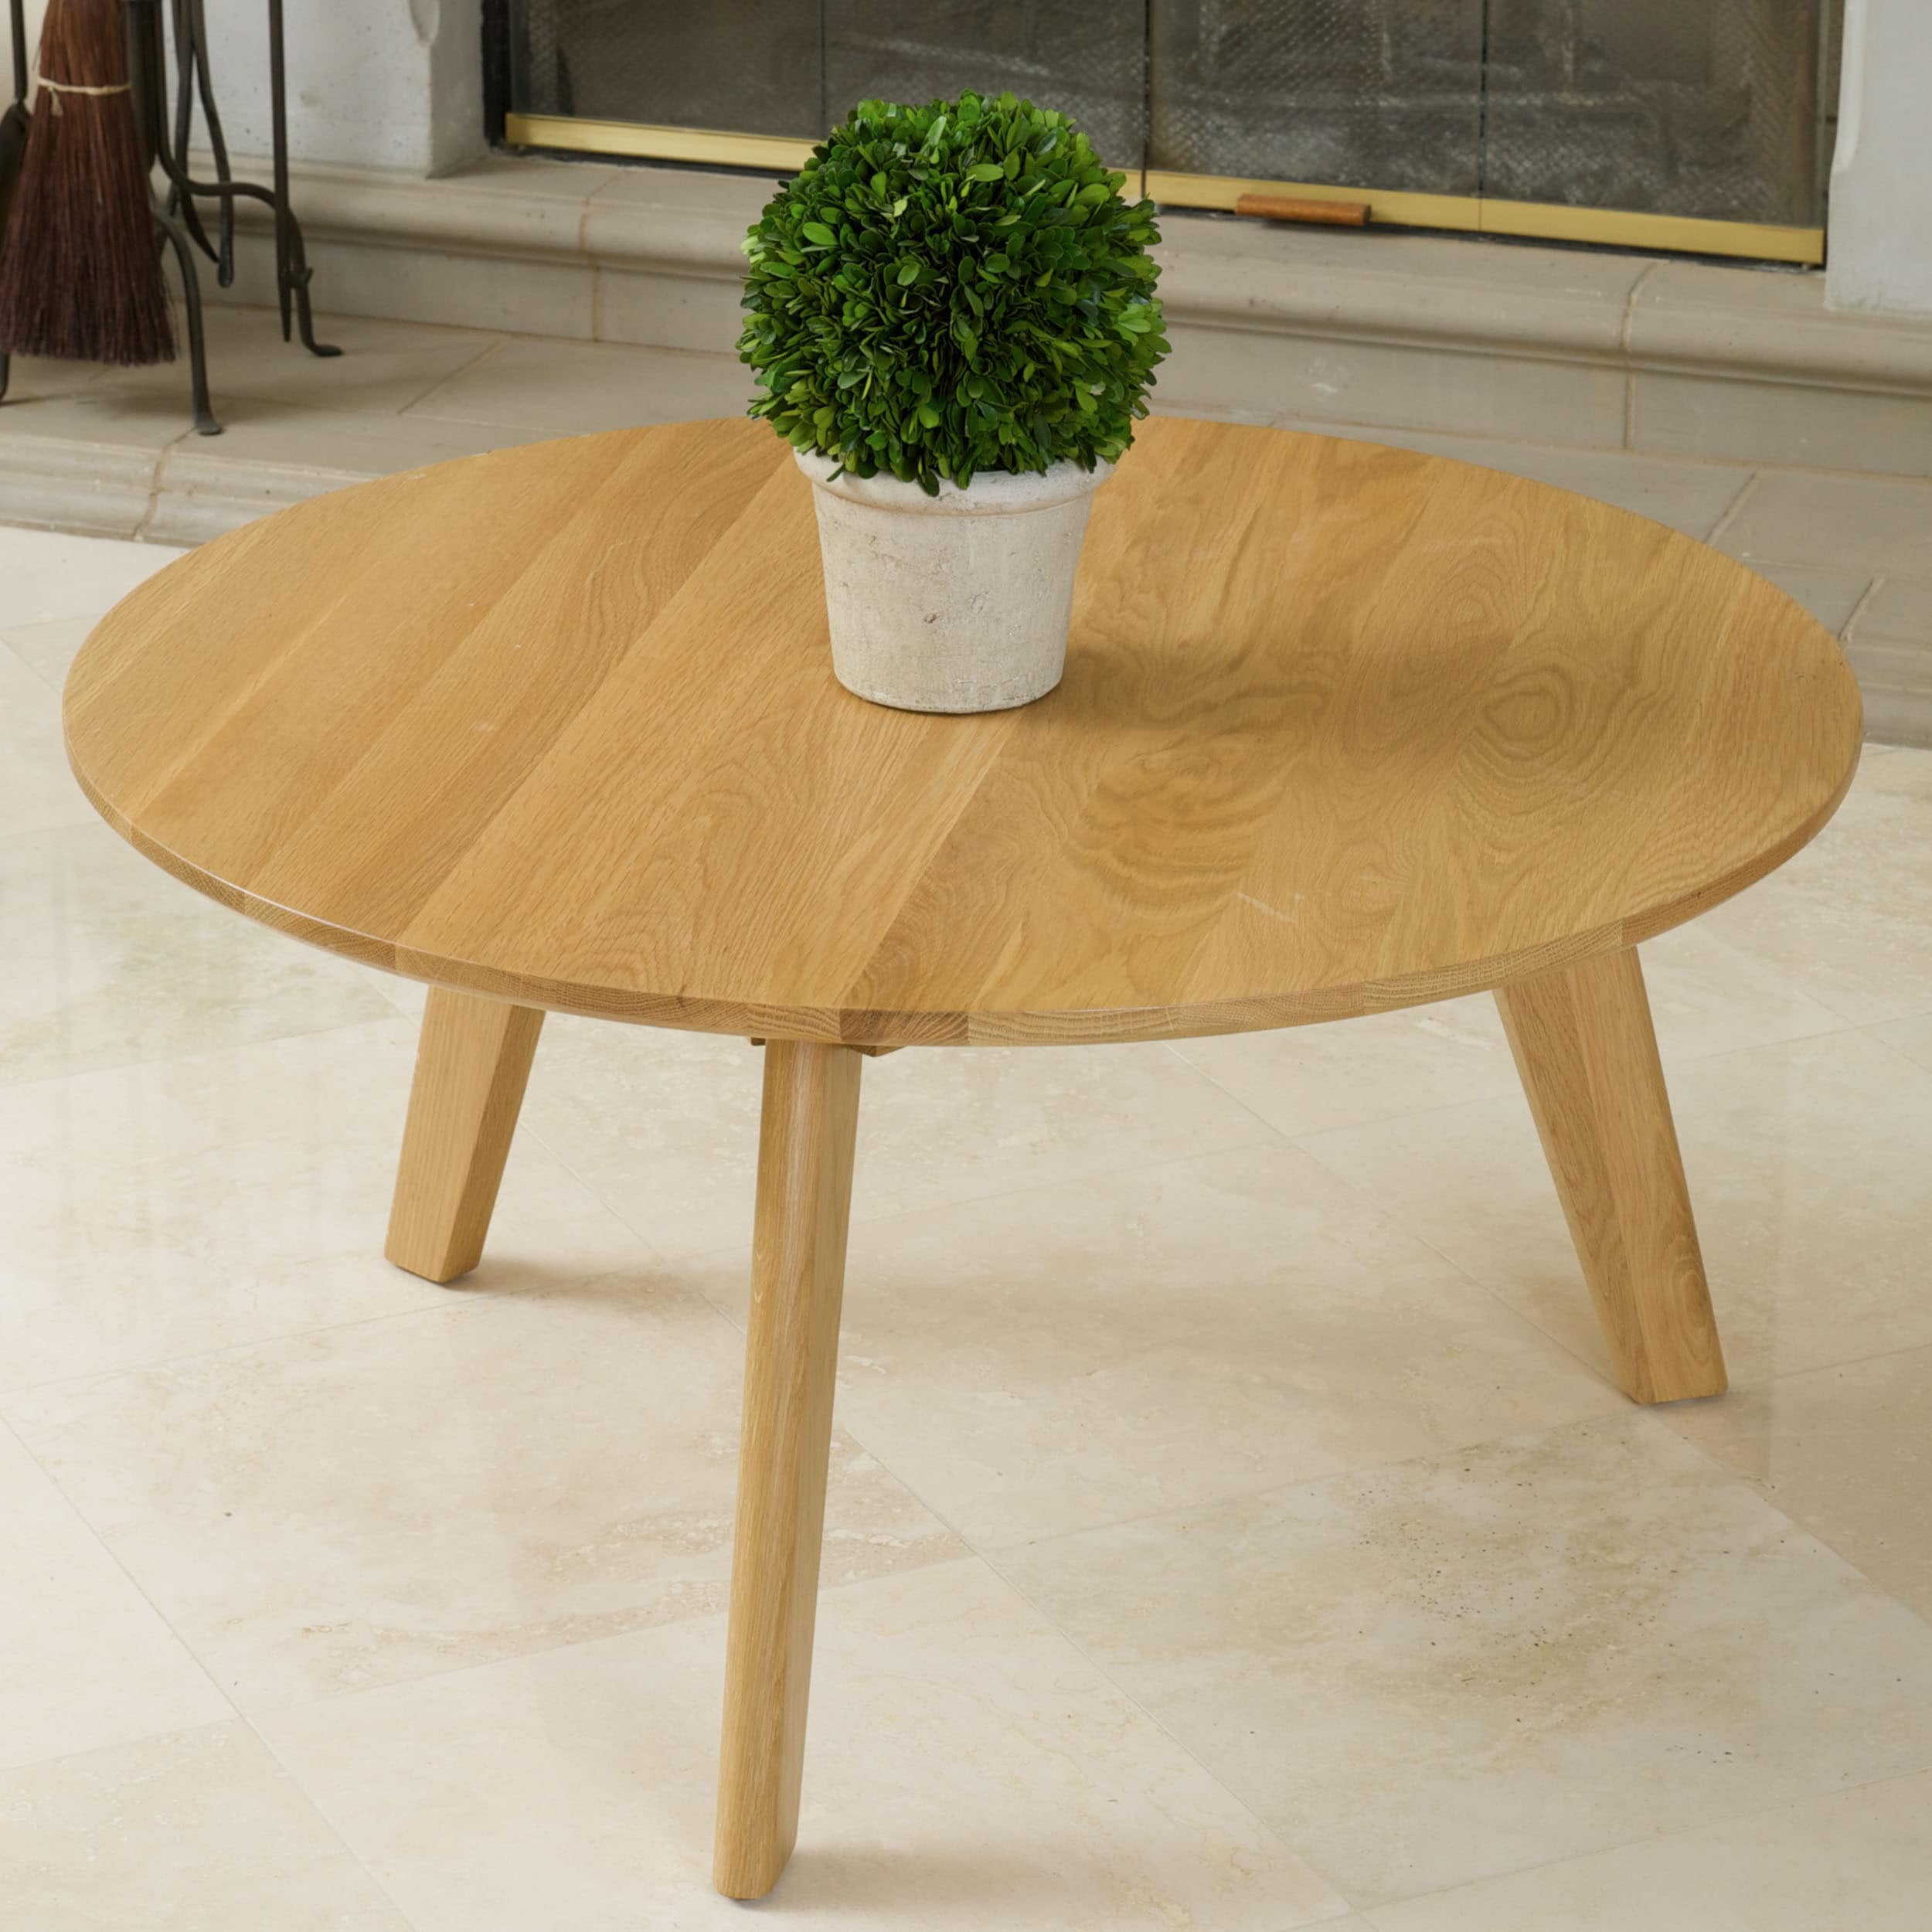 Christopher Knight Home Russert Solid Oak Table Today $126.99 Sale $